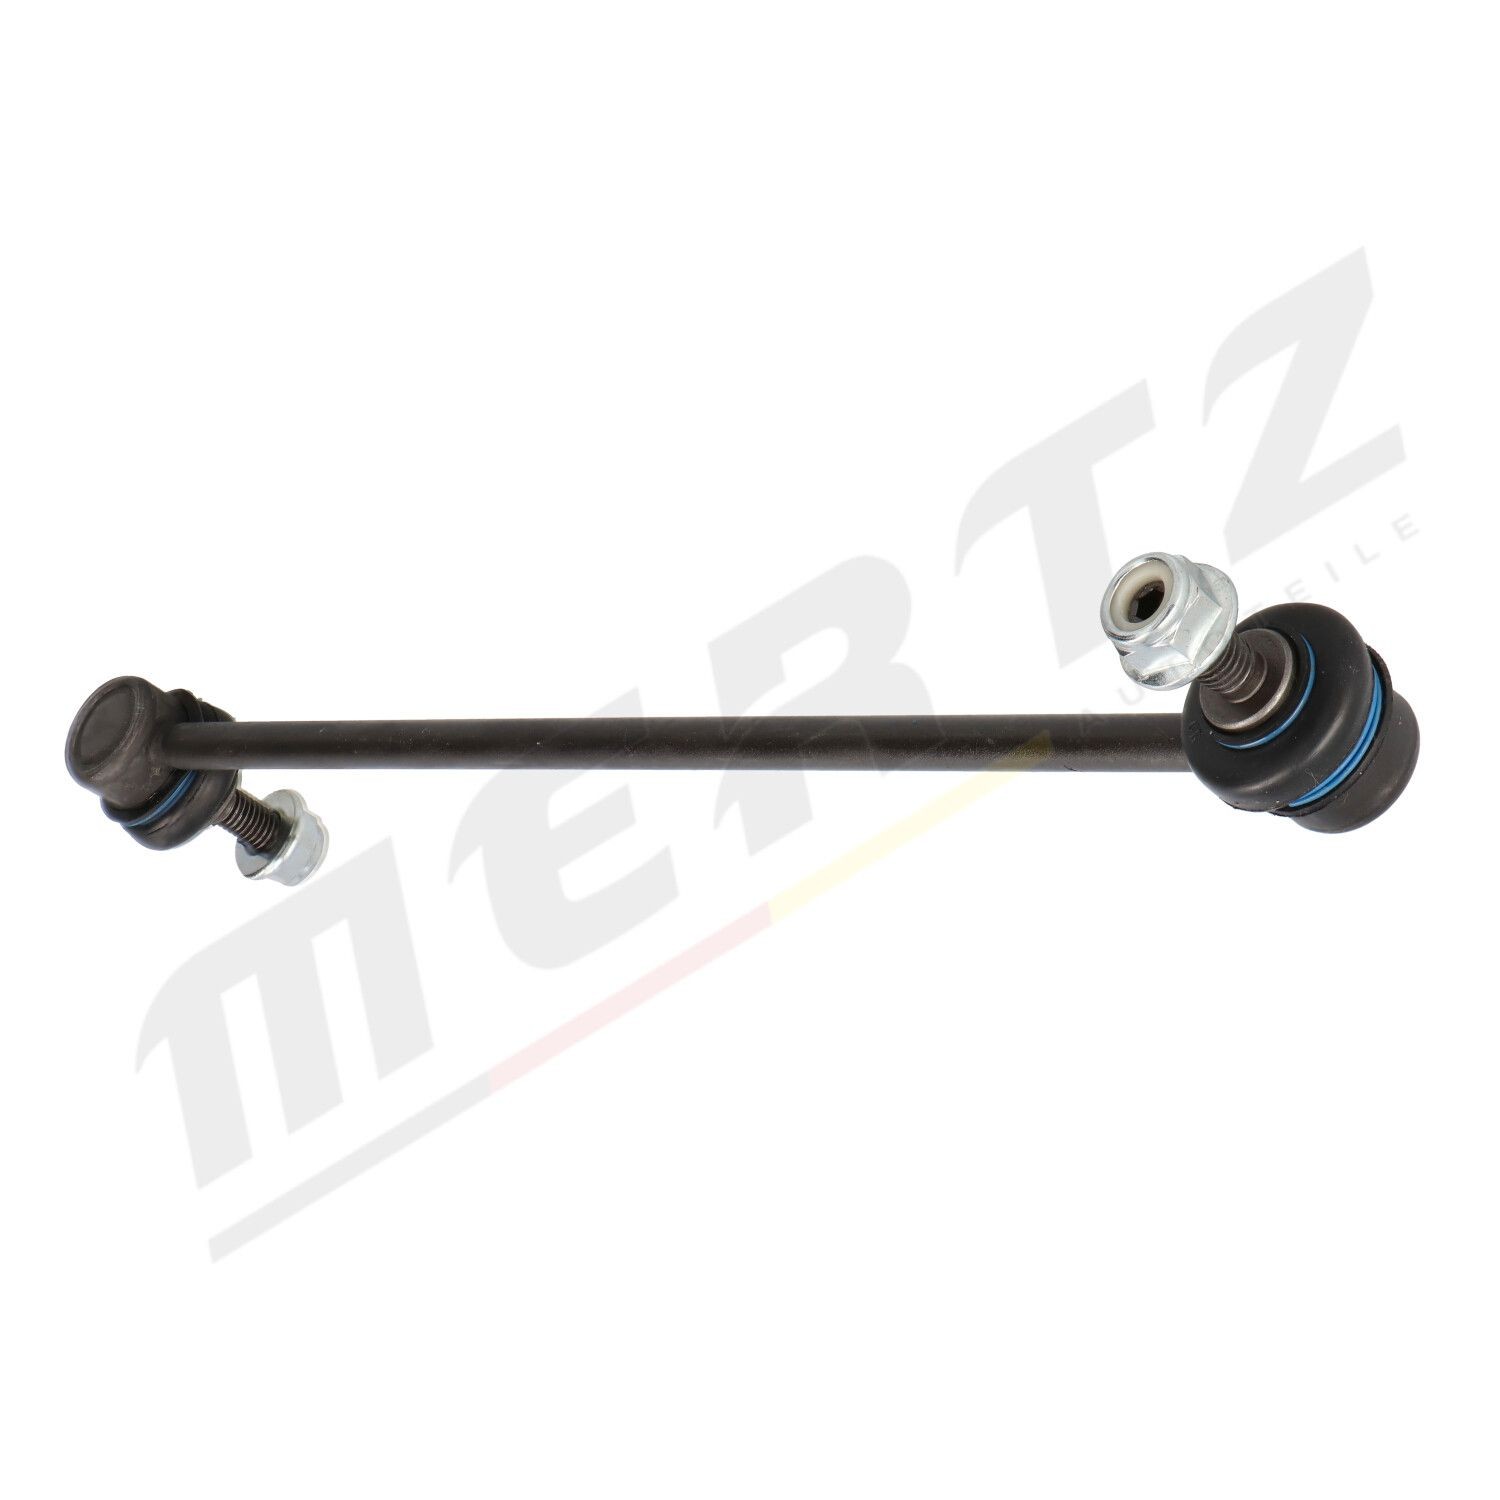 Anti-roll bar links MERTZ Front Axle Left, Front Axle Right, 335mm, M10x1,5 - M-S0411